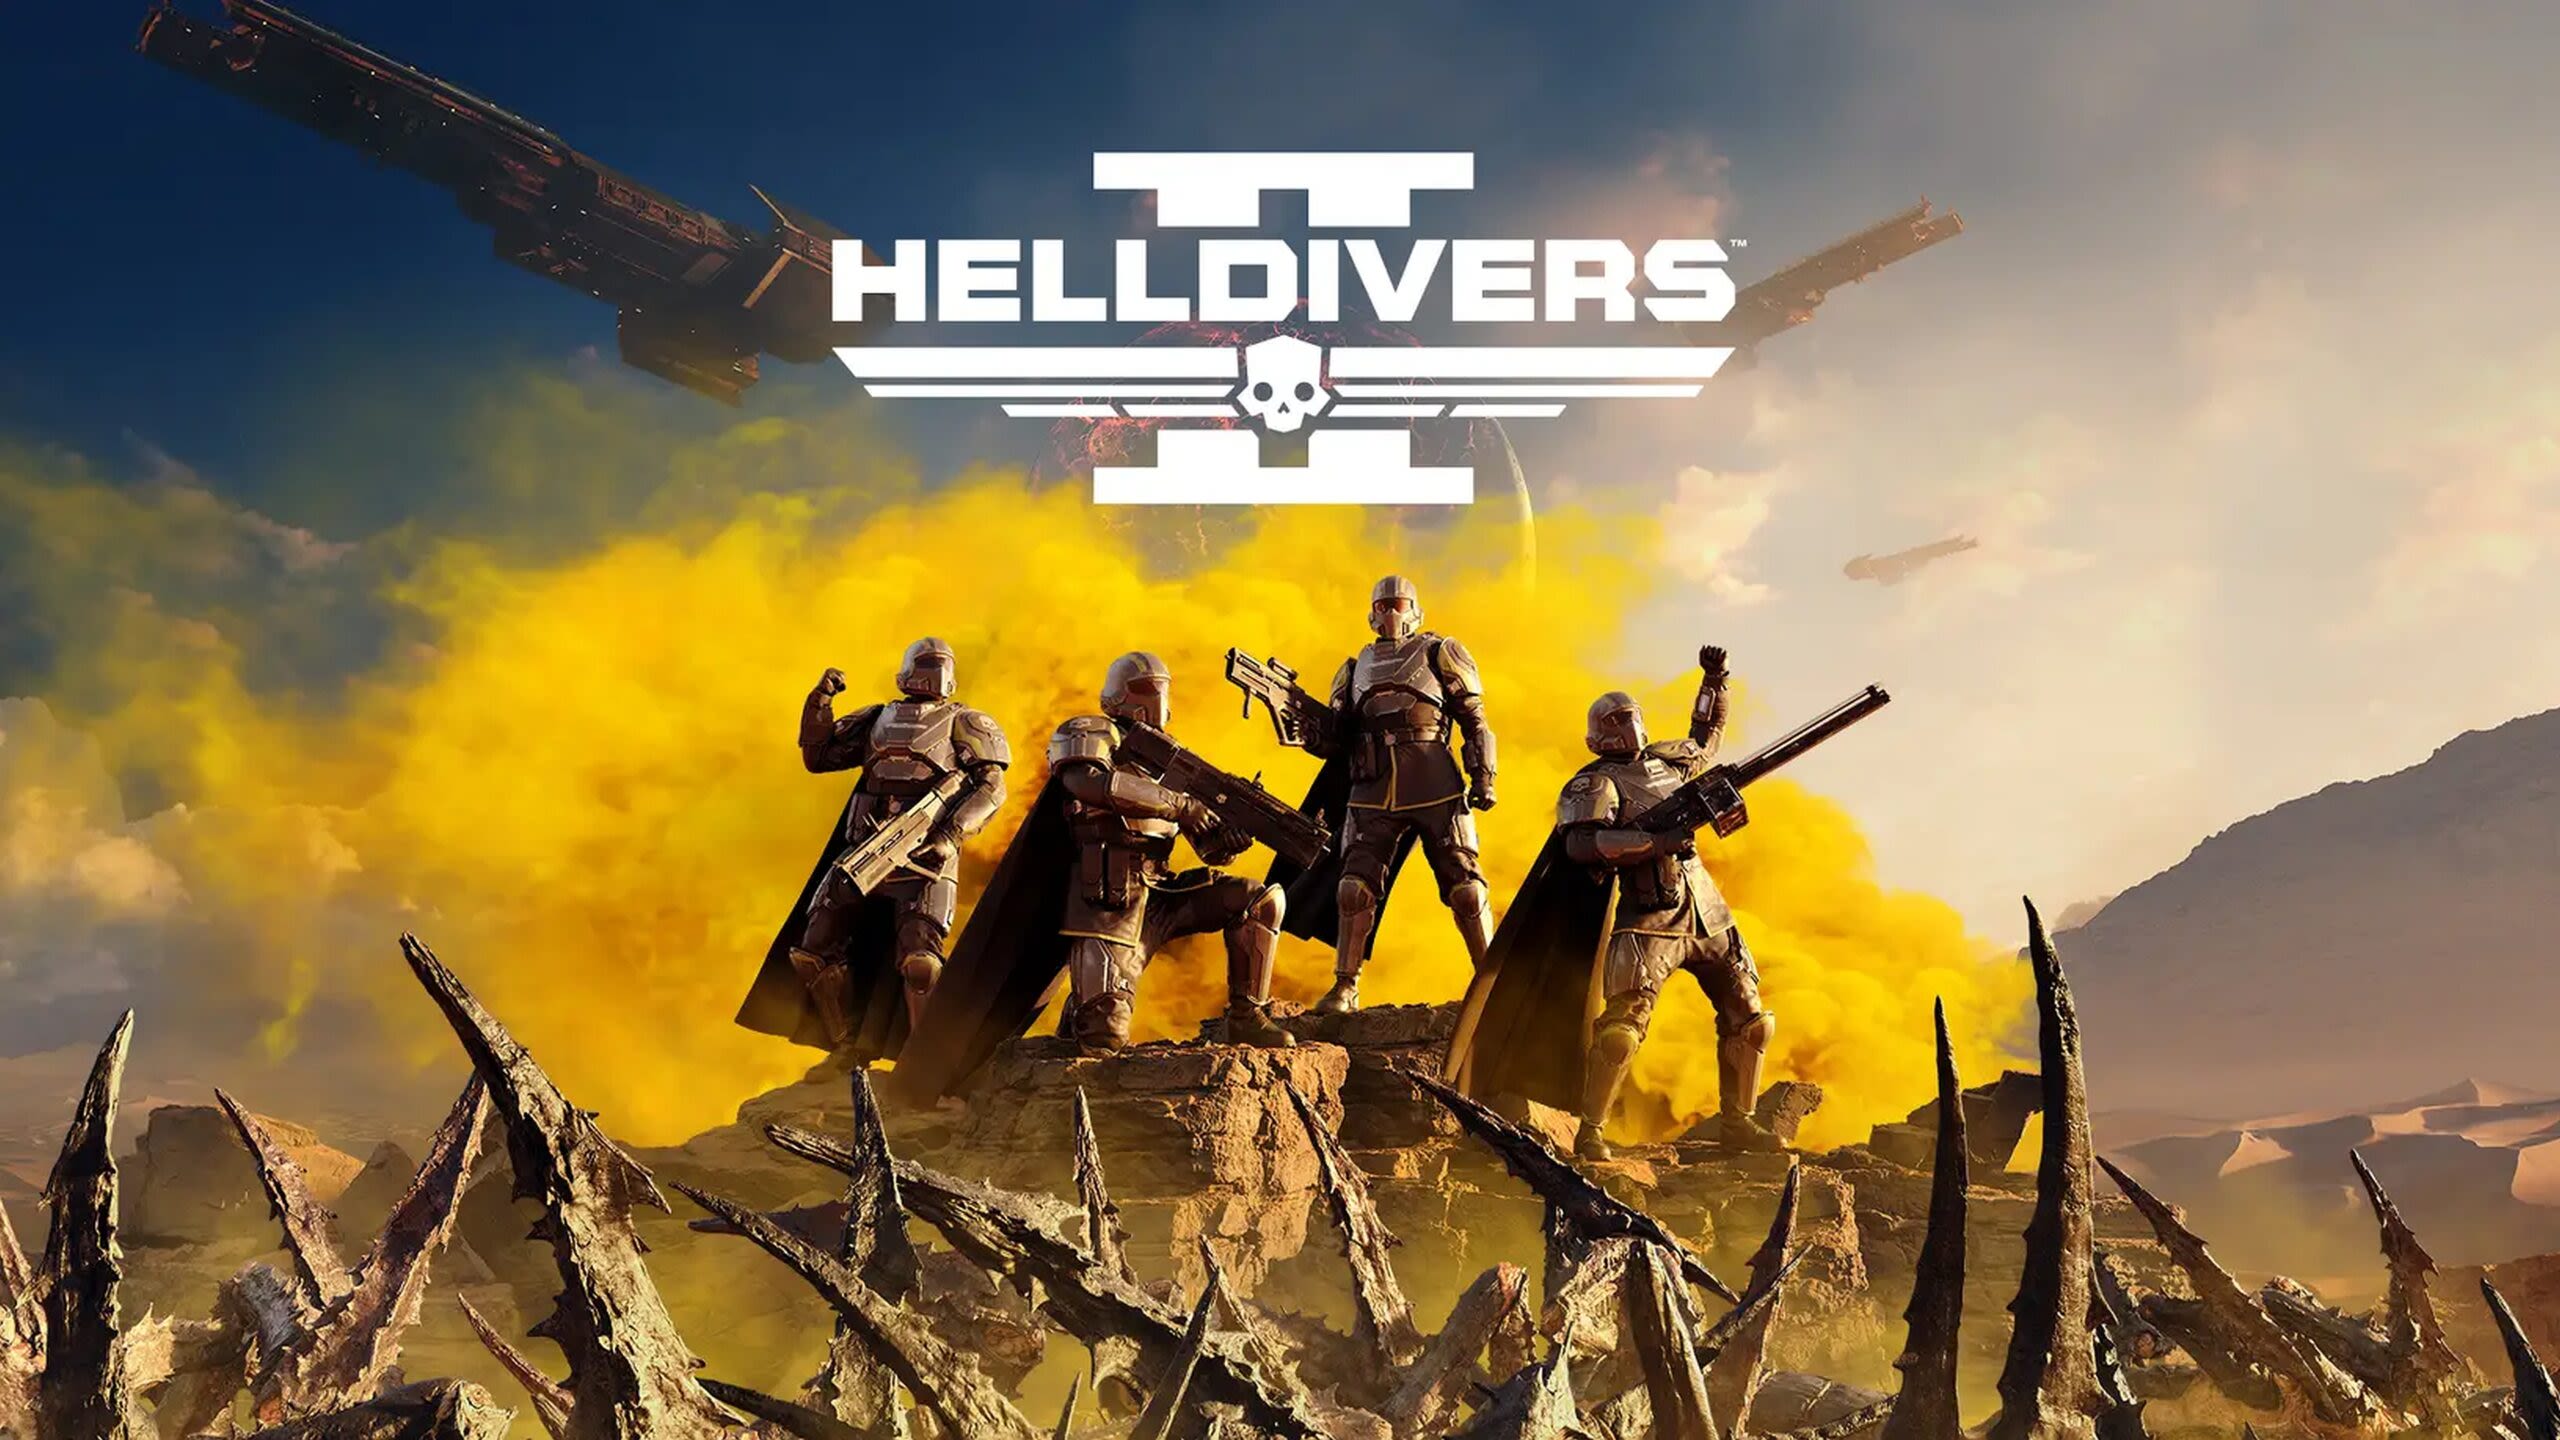 Helldivers 2 Players Are Actually On The 'Evil Side', Reveals Arrowhead's Chief Creative Officer